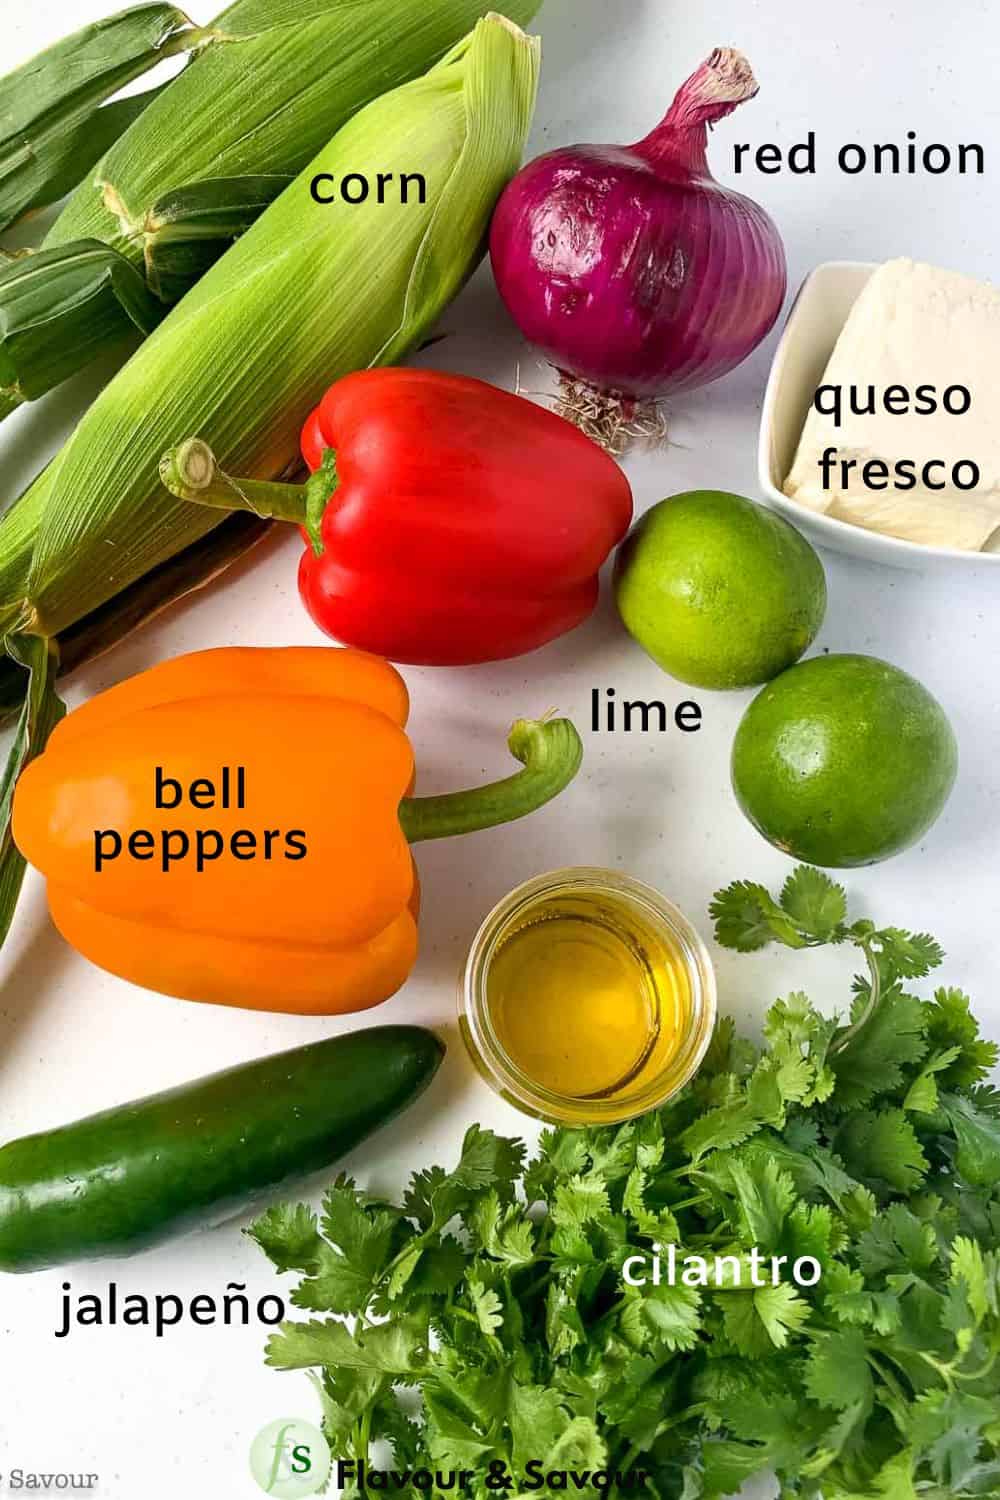 Ingredients for Mexican corn salad with labels.